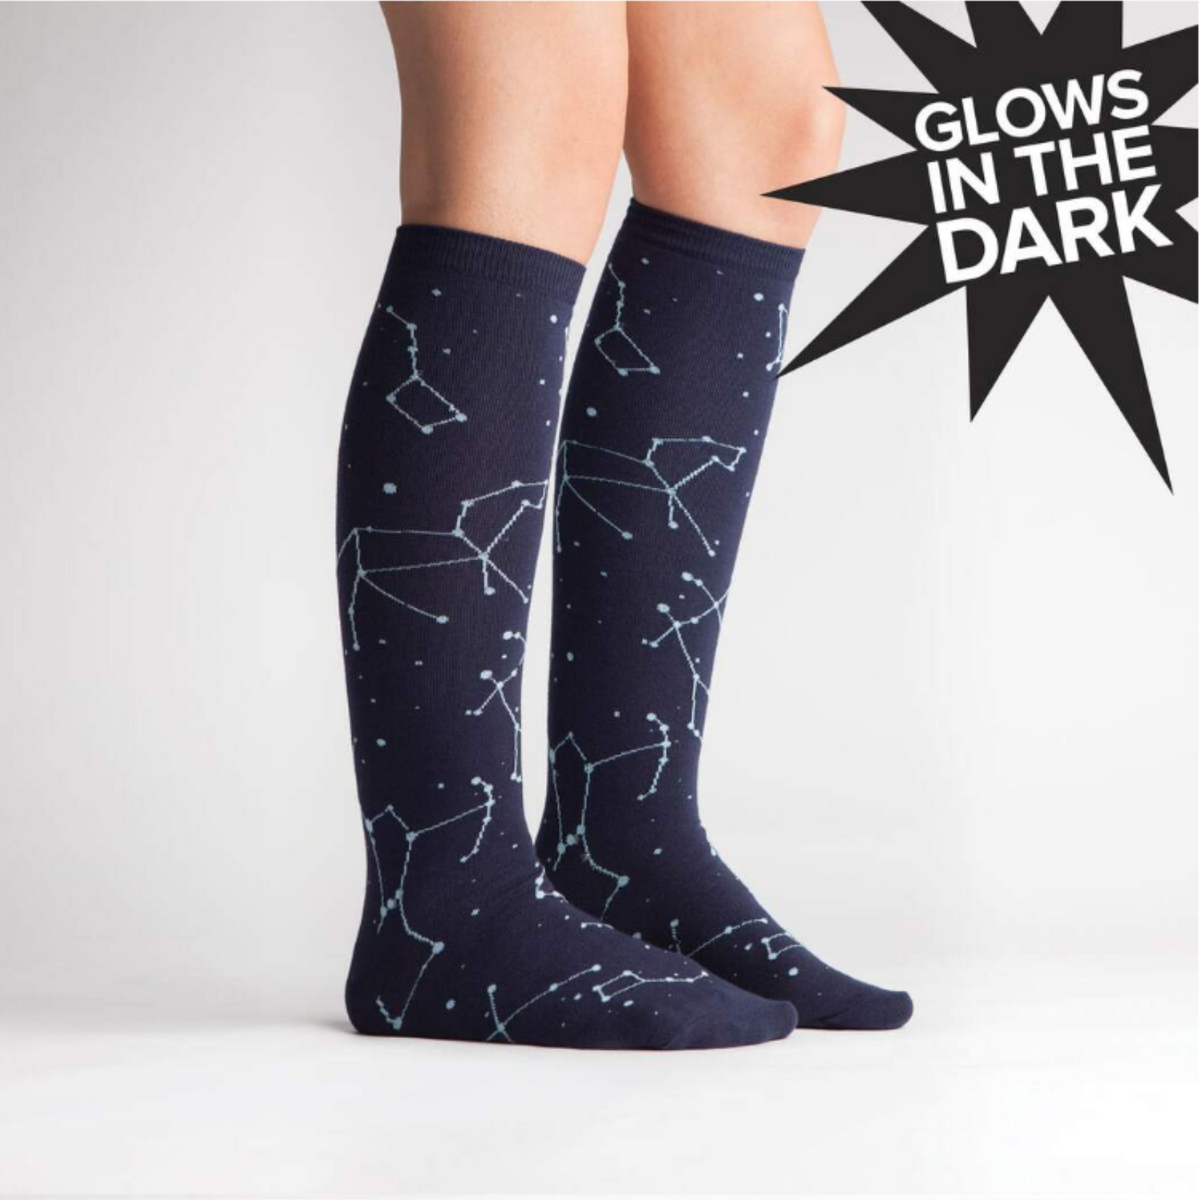 Sock It To Me Constellation (GLOWS IN THE DARK!) women&#39;s knee high sock. Featuring navy blue sock with constellations all over. Socks worn by model. 